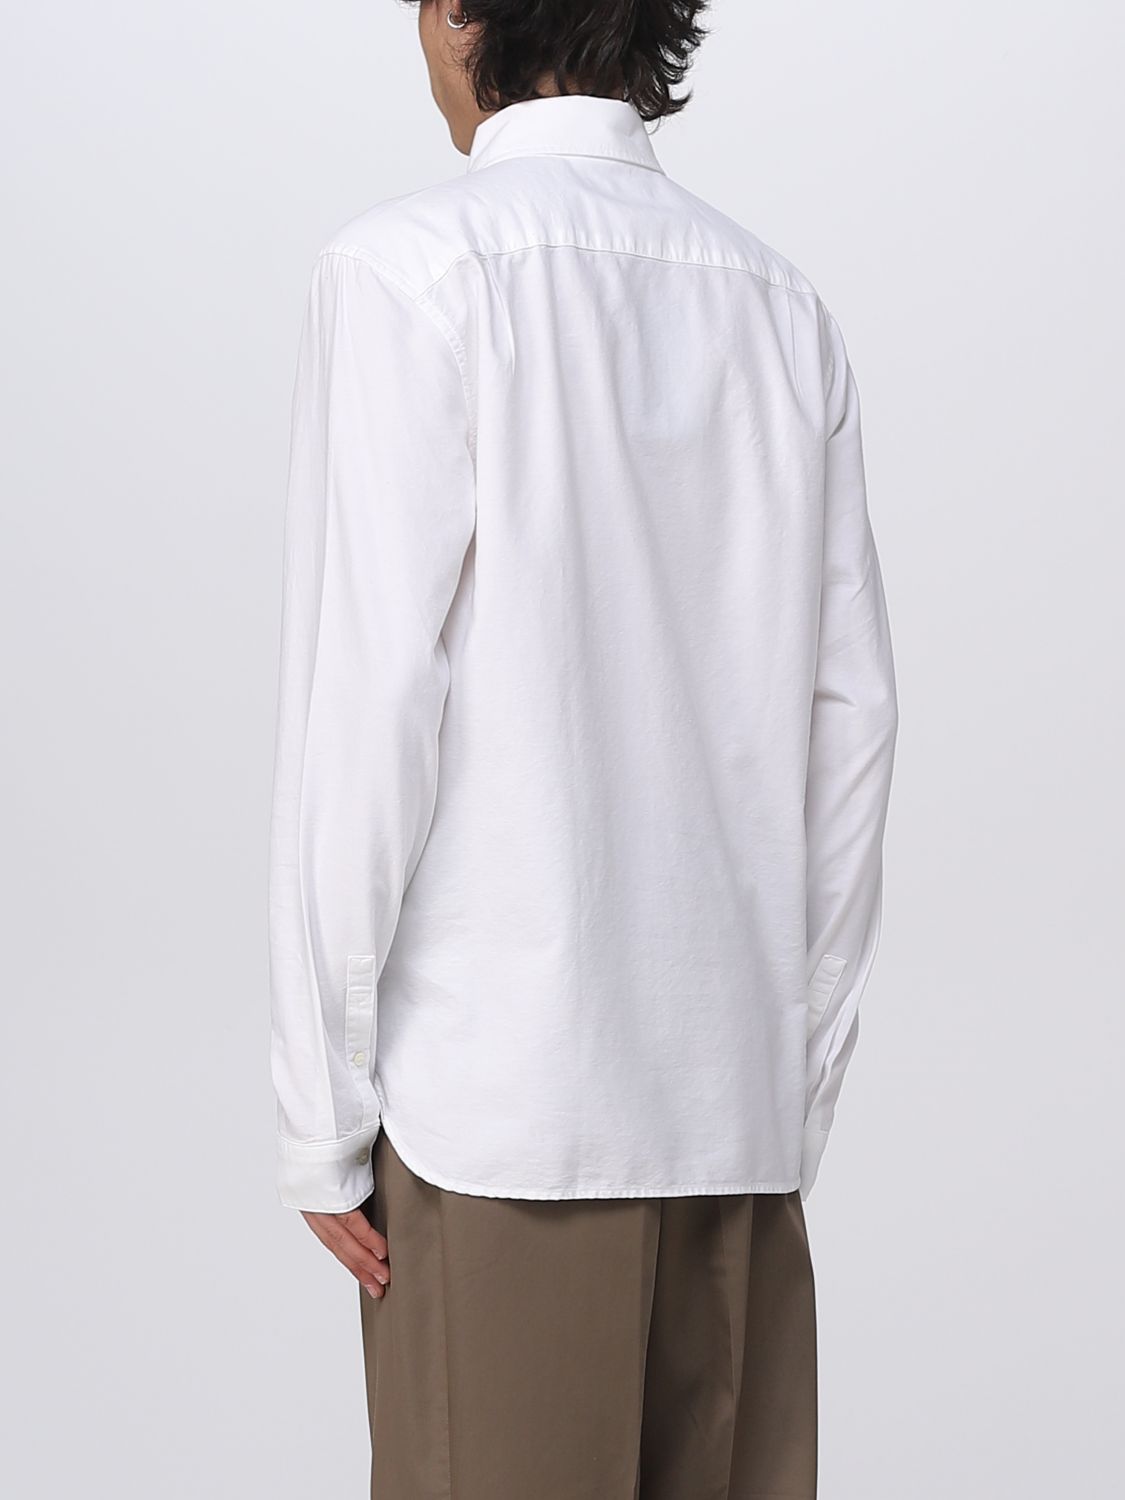 Premedicatie natuurlijk Boos FRED PERRY: shirt for man - White | Fred Perry shirt M5516 online on  GIGLIO.COM